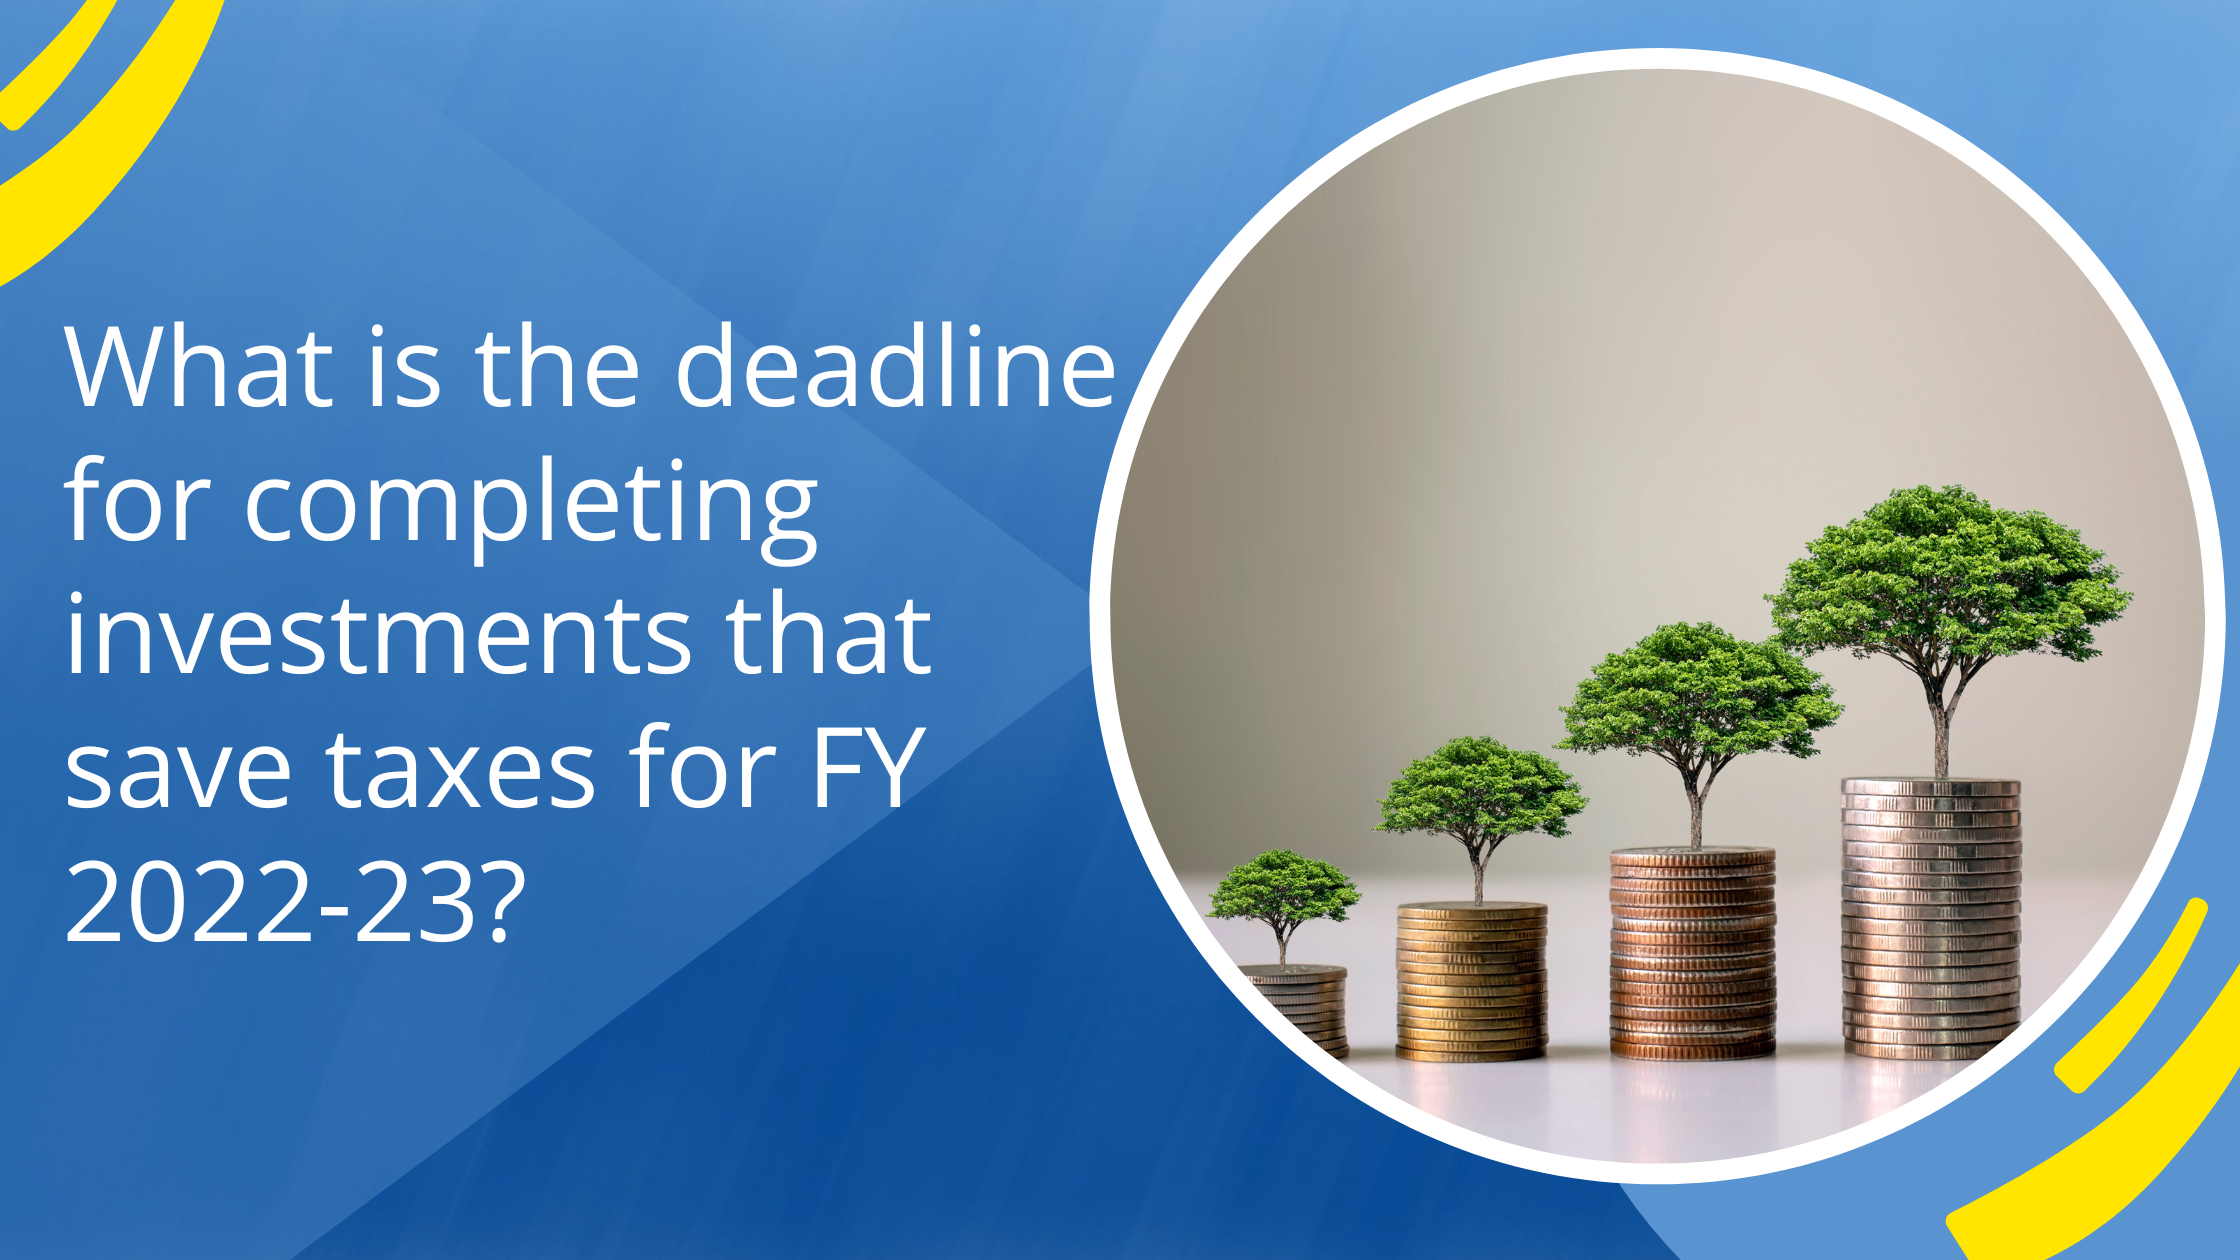 What is the deadline for completing investments that save taxes for FY 2022-23?